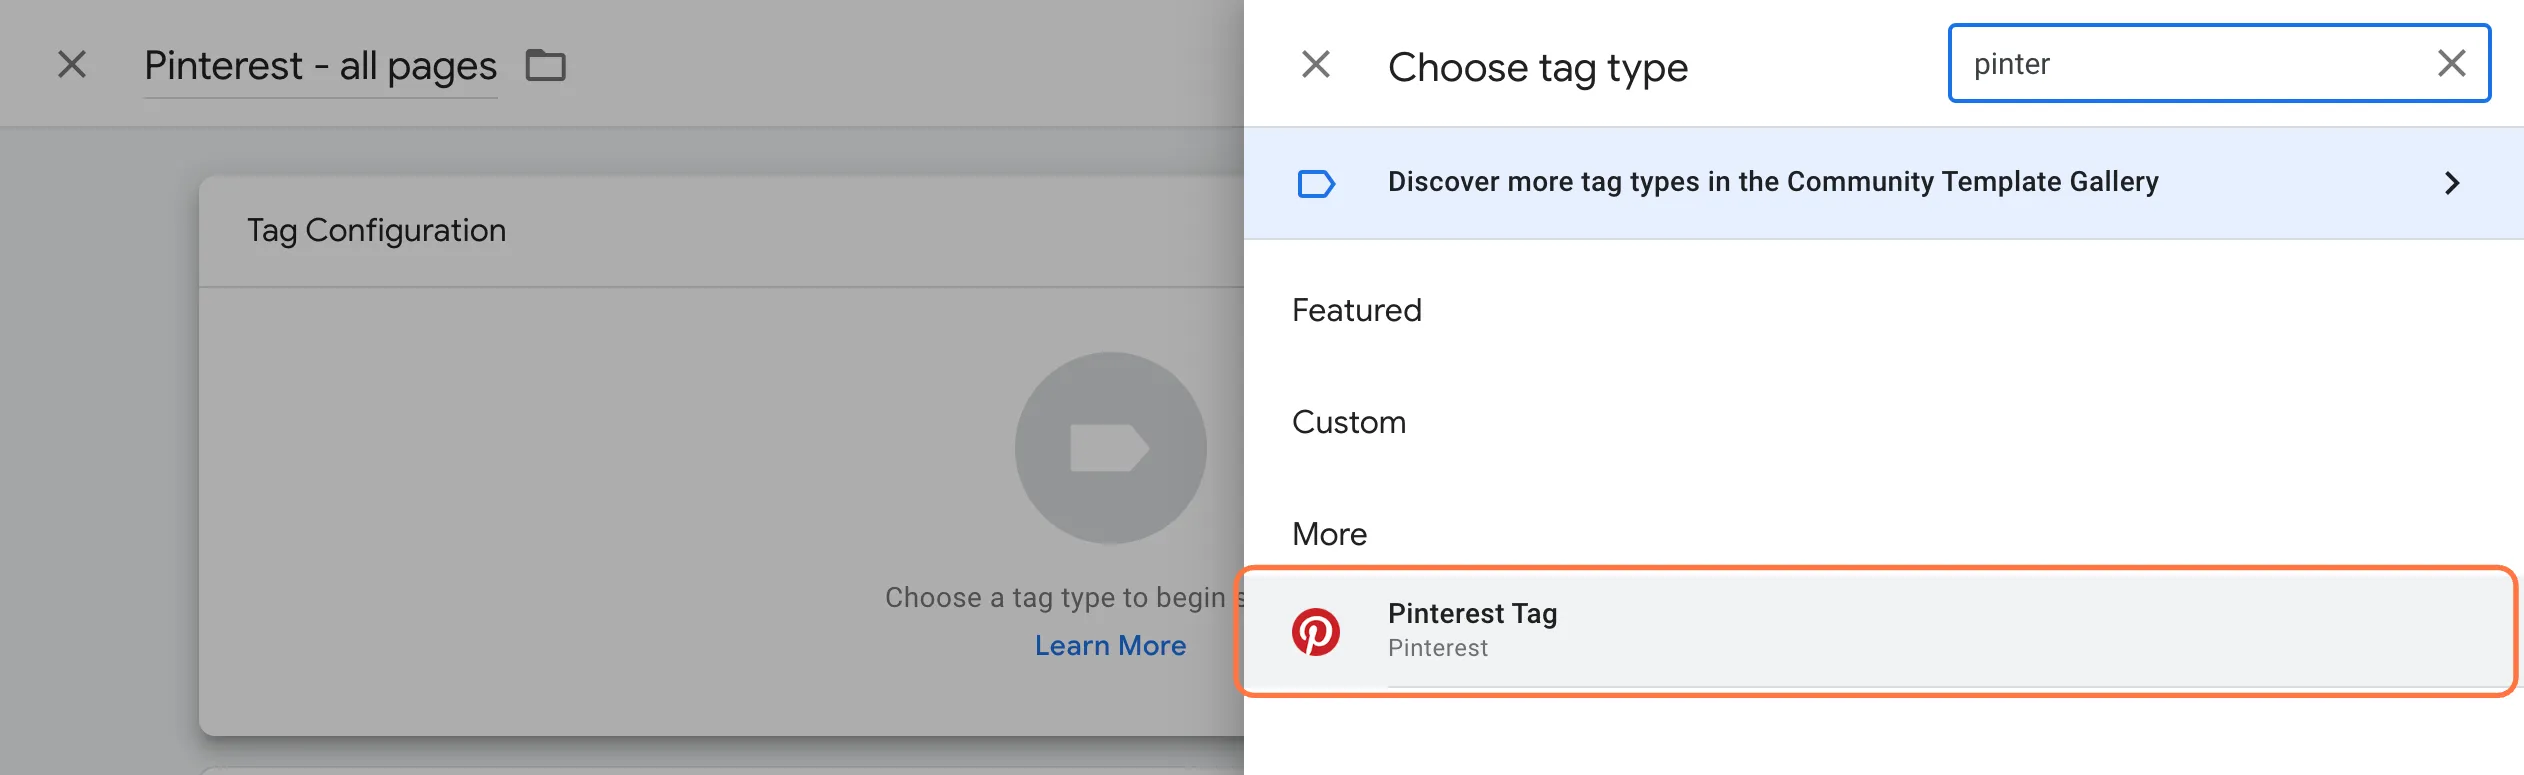 choose-tag-type-google-tag-manager-pinterest-tag